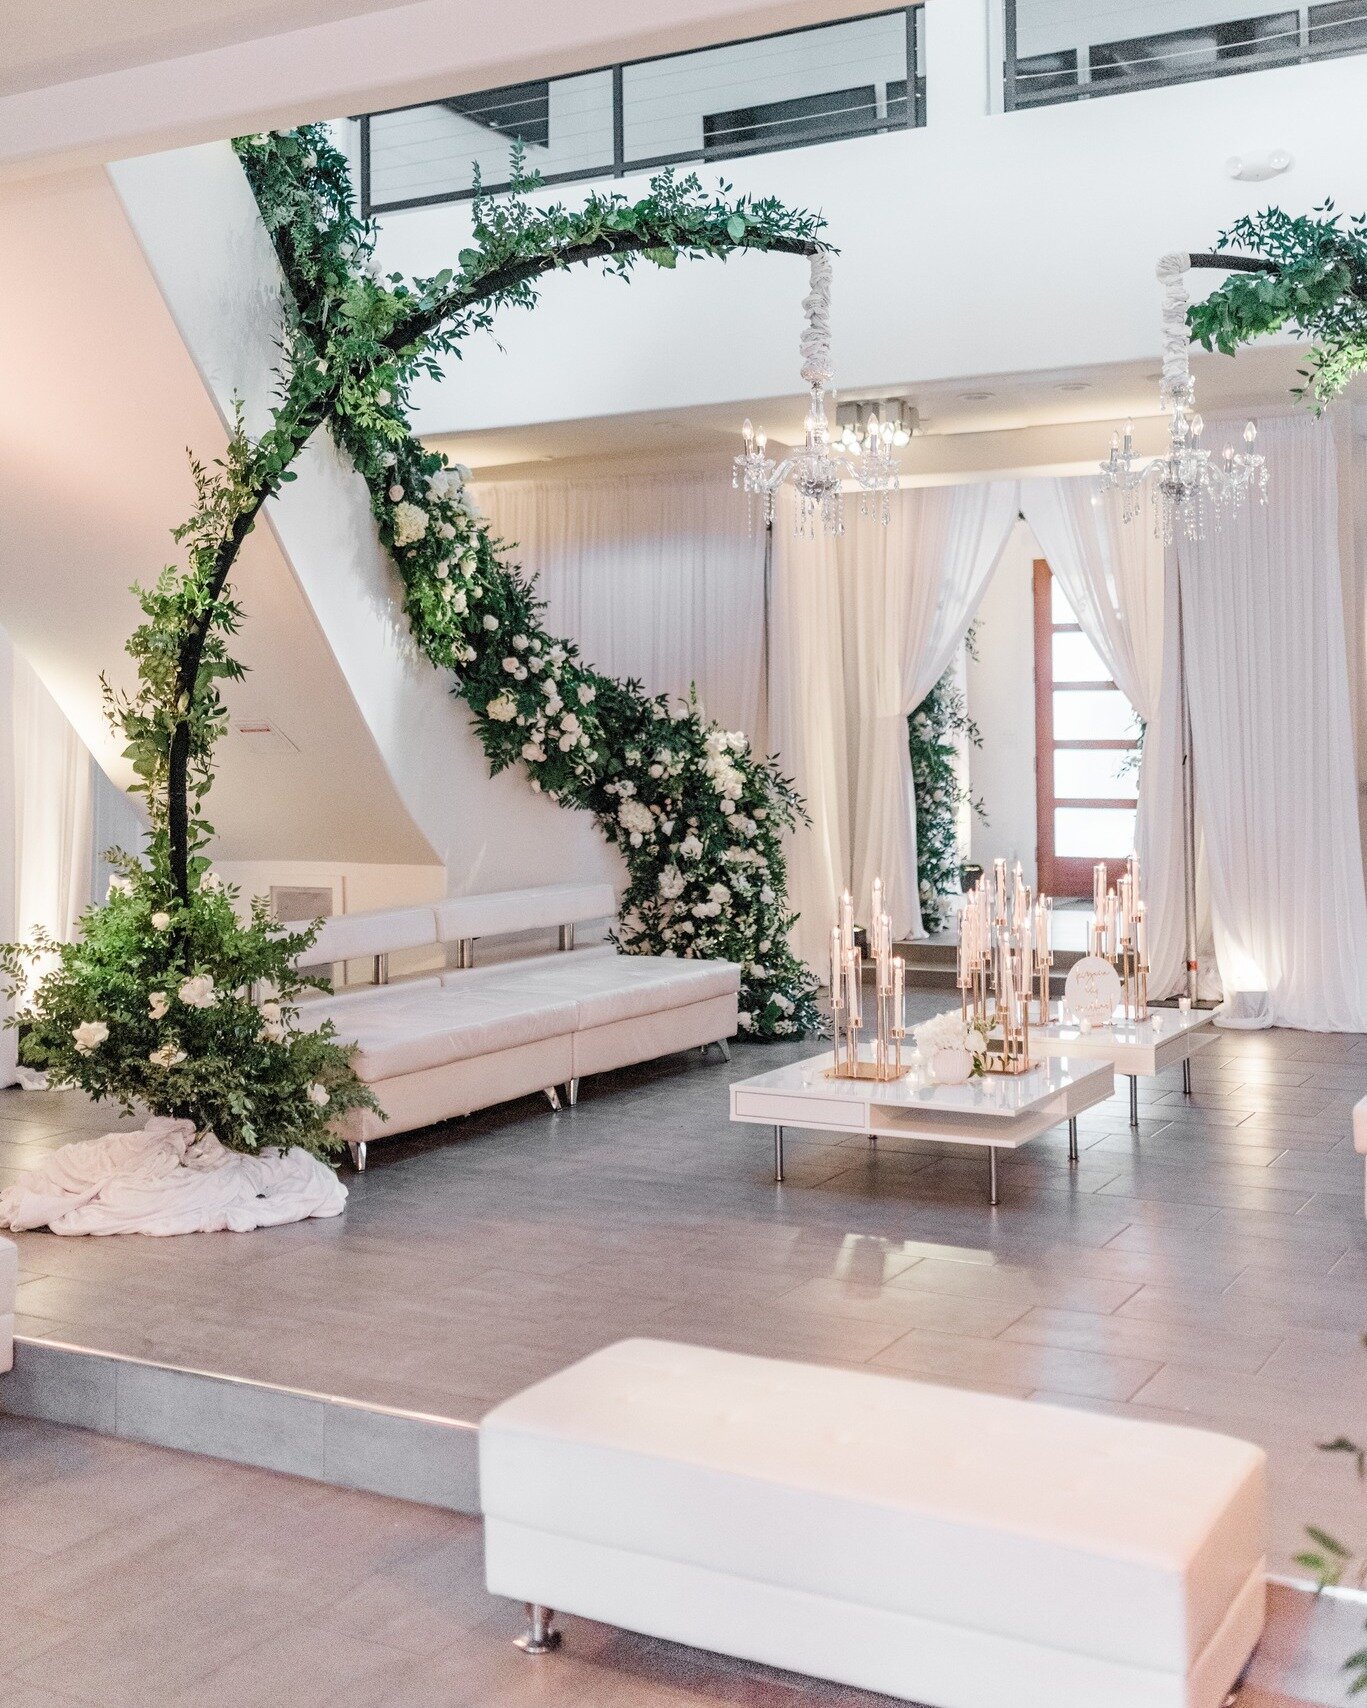 At this Lotus House engagement party, every element whispered sophistication ✨
They used our existing design and architecture to enhance their decor and the two matched perfectly. 
What are your thoughts? Indoor or outdoor reception at Lotus House? S